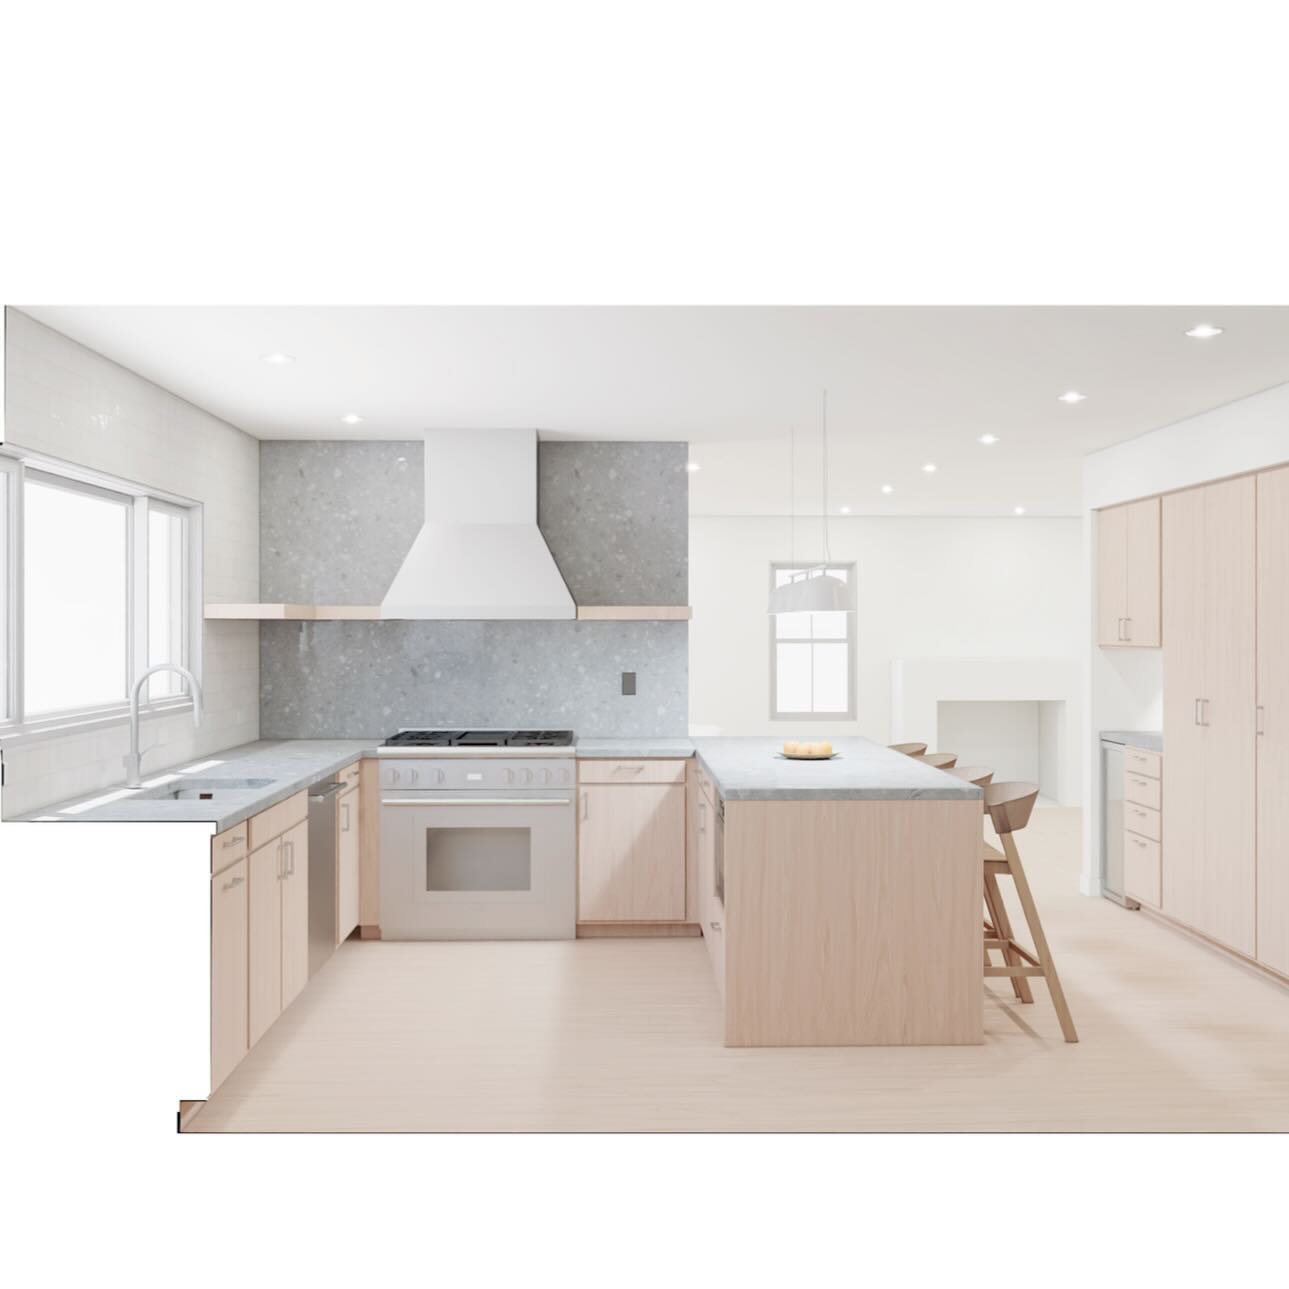 Kitchen rendering for Pasqual Ave in San Gabriel.
Architect: @karabachian 
#karabachian #karabachianarchitectsinc #residential #residentialdesign #architecture